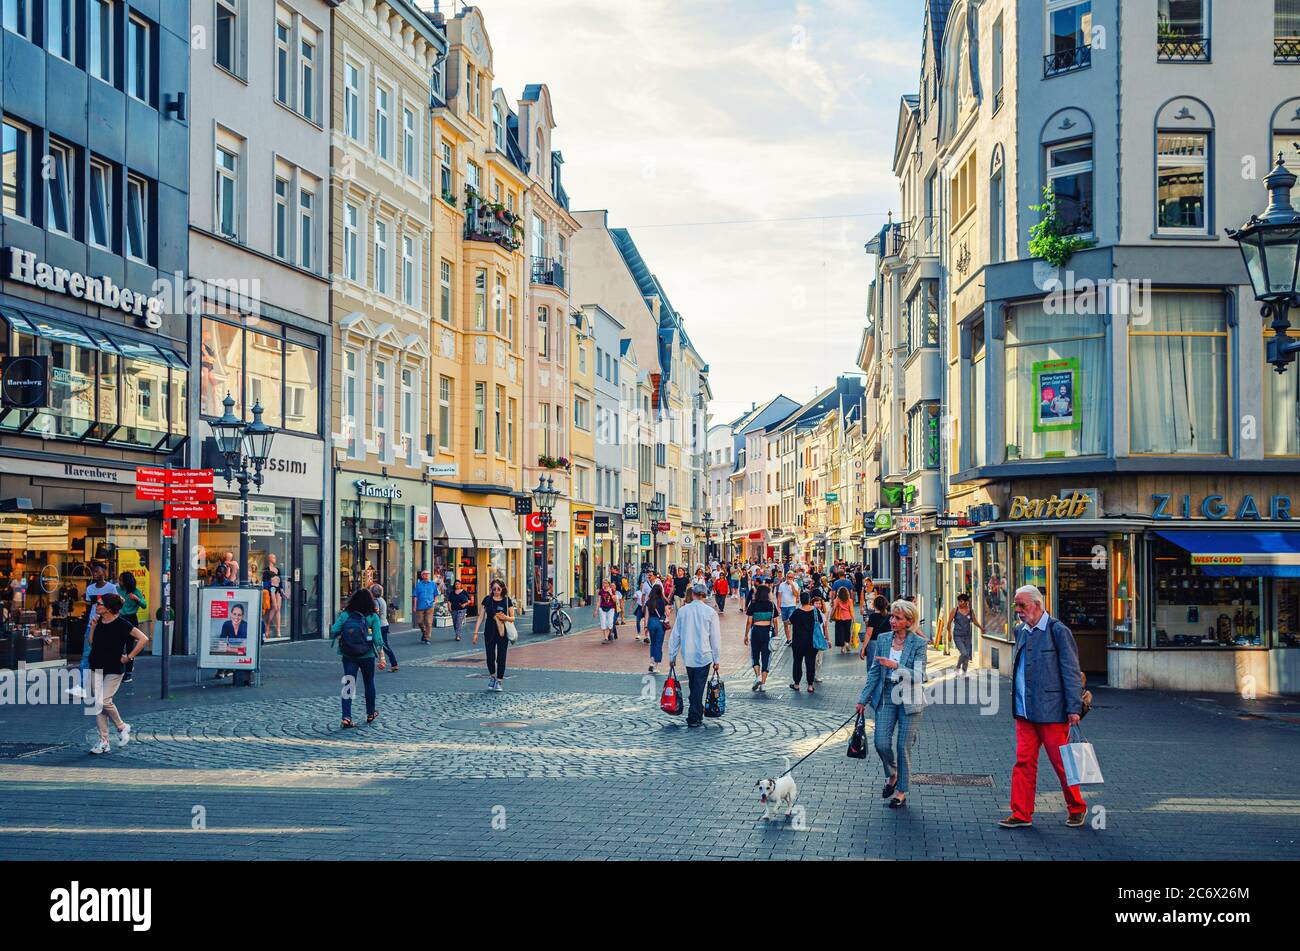 Bonn, Germany, August 23, 2019: people tourists walking down cobblestone  street in historical city centre with old houses and store buildings, North  Rhine-Westphalia region Stock Photo - Alamy